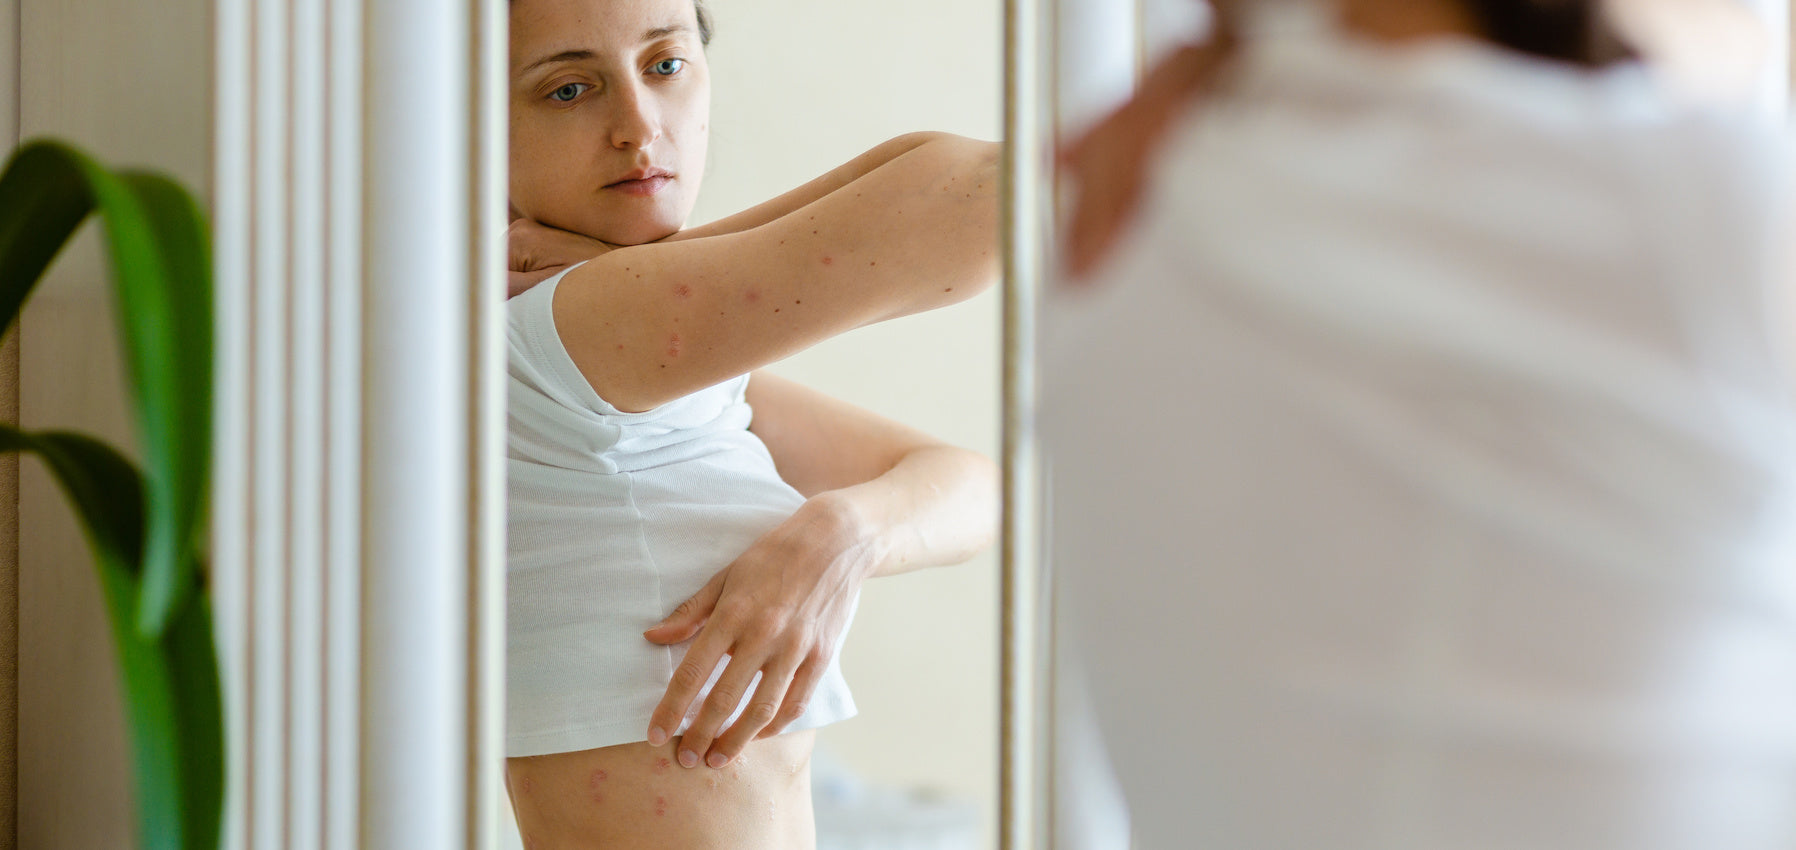 Eczema vs Psoriasis: Main Differences and Best Products to Treat Them